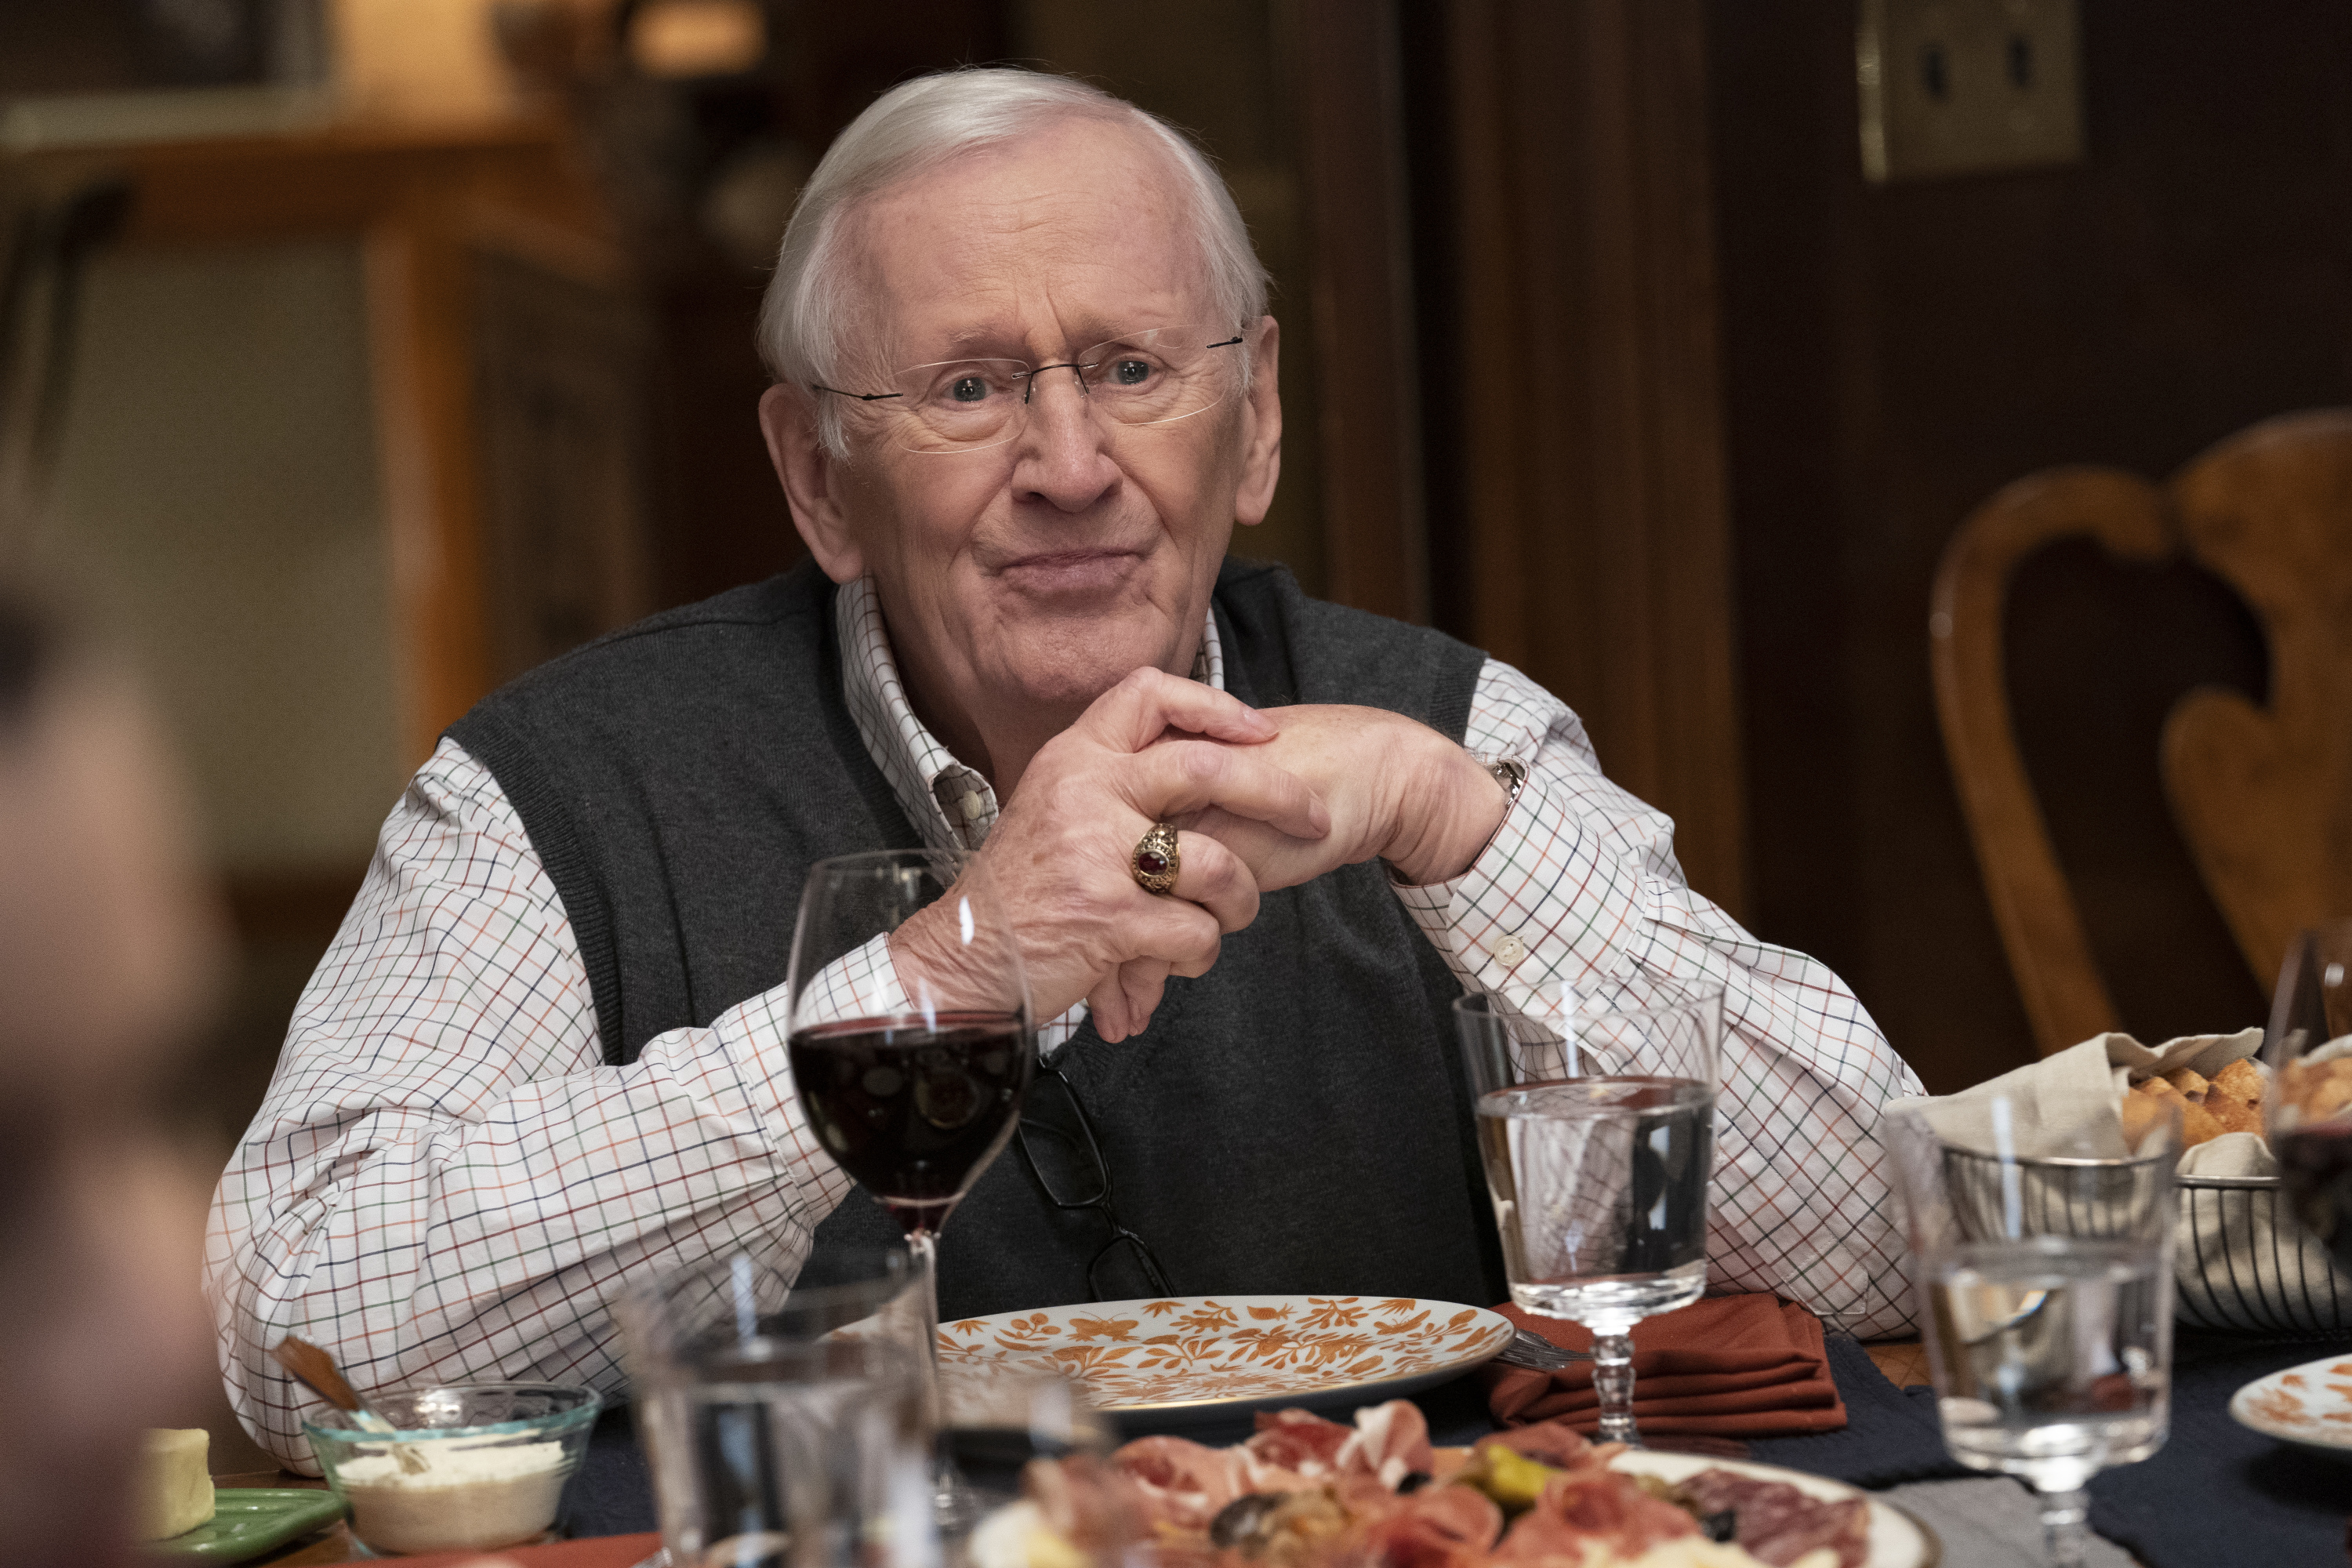 Blue Bloods: Len Cariou Net Worth and How He Became Famous